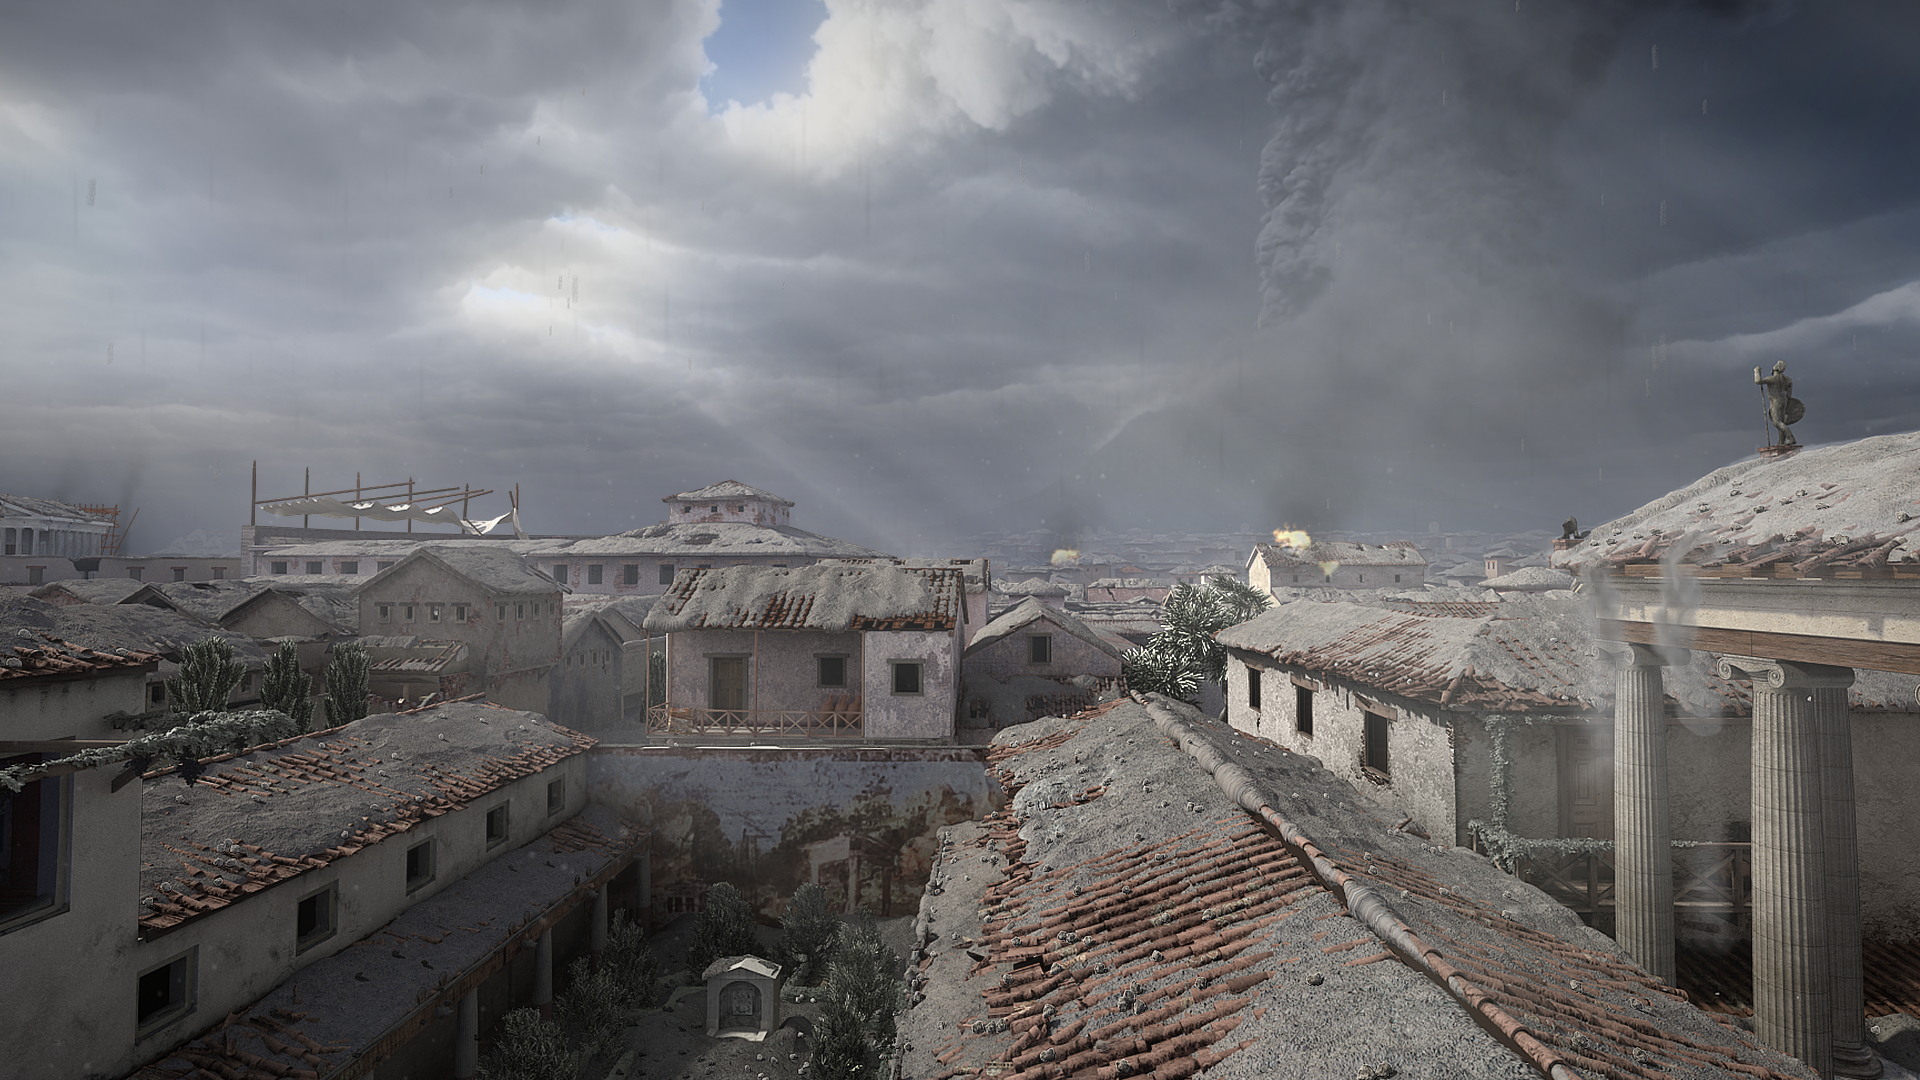 Pompeii Cinematic Image Ashes Cover the City